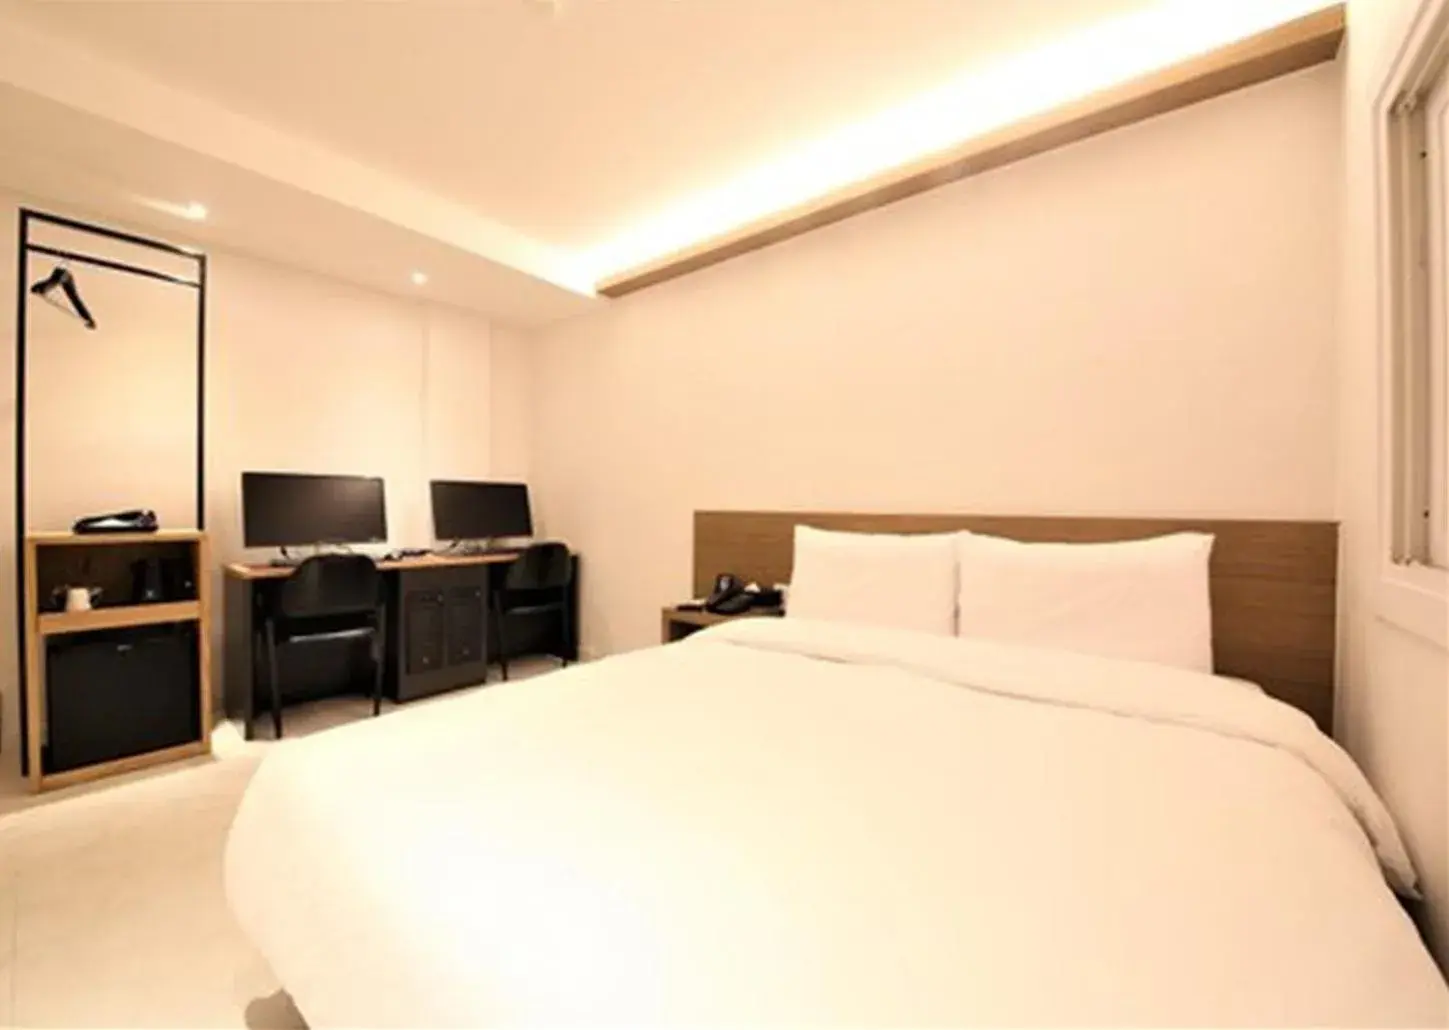 Property building, Bed in Busan Seomyeon Business Hotel J7                                                                